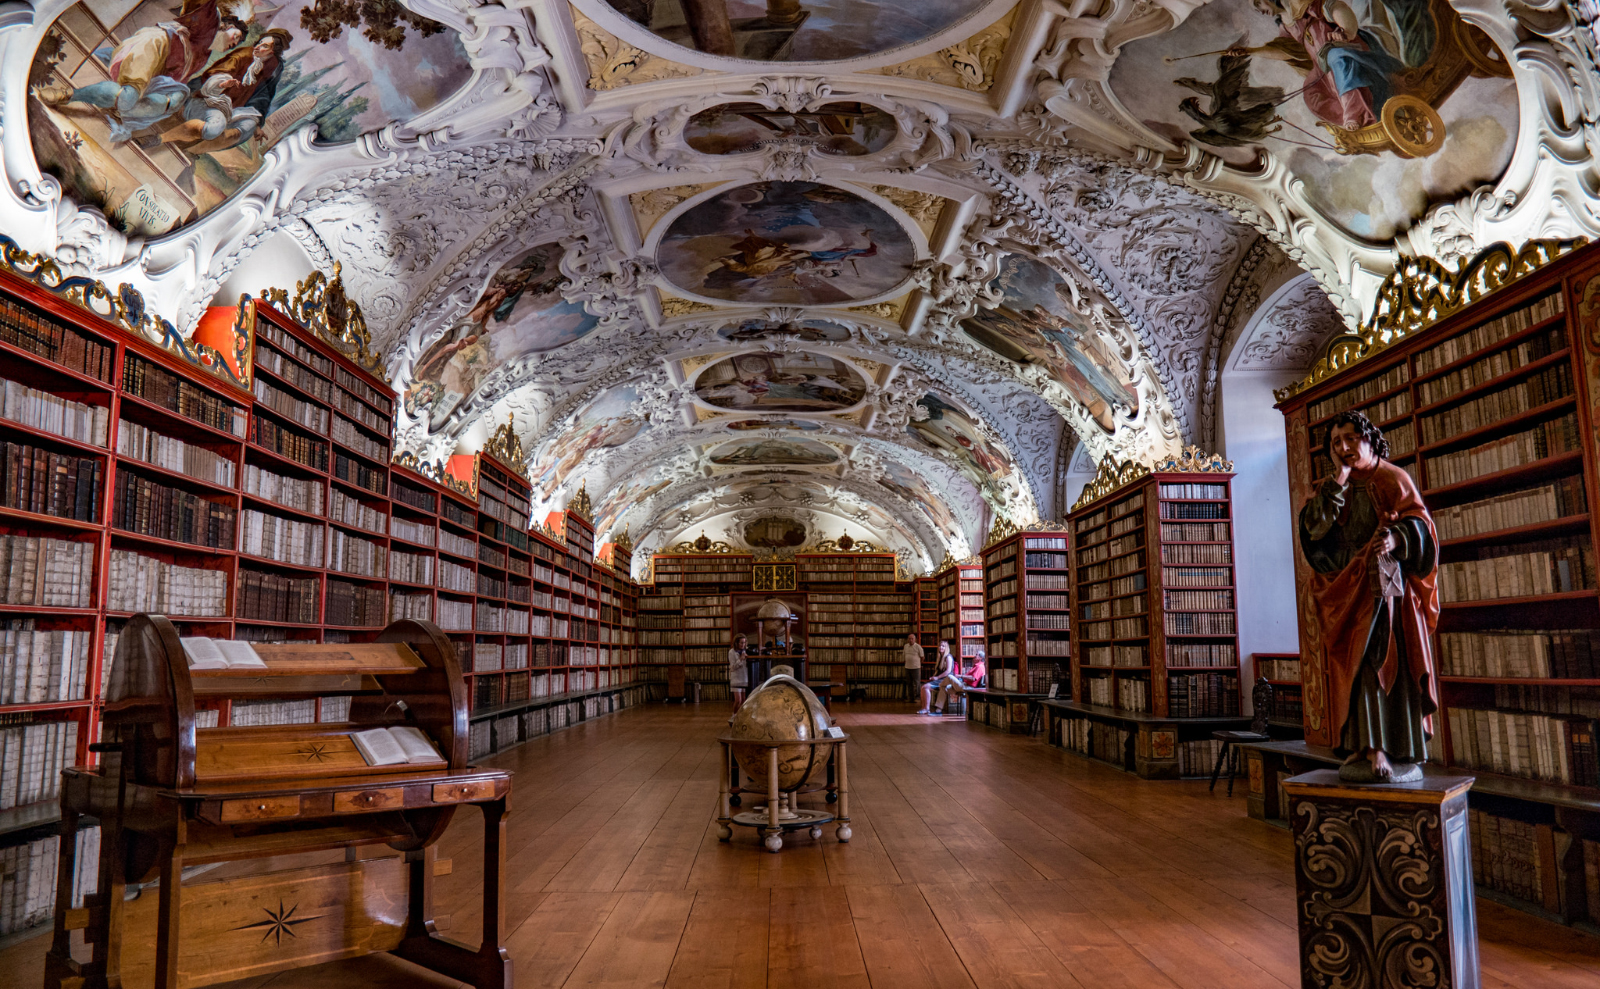 the theological hall of the strahov monastery library